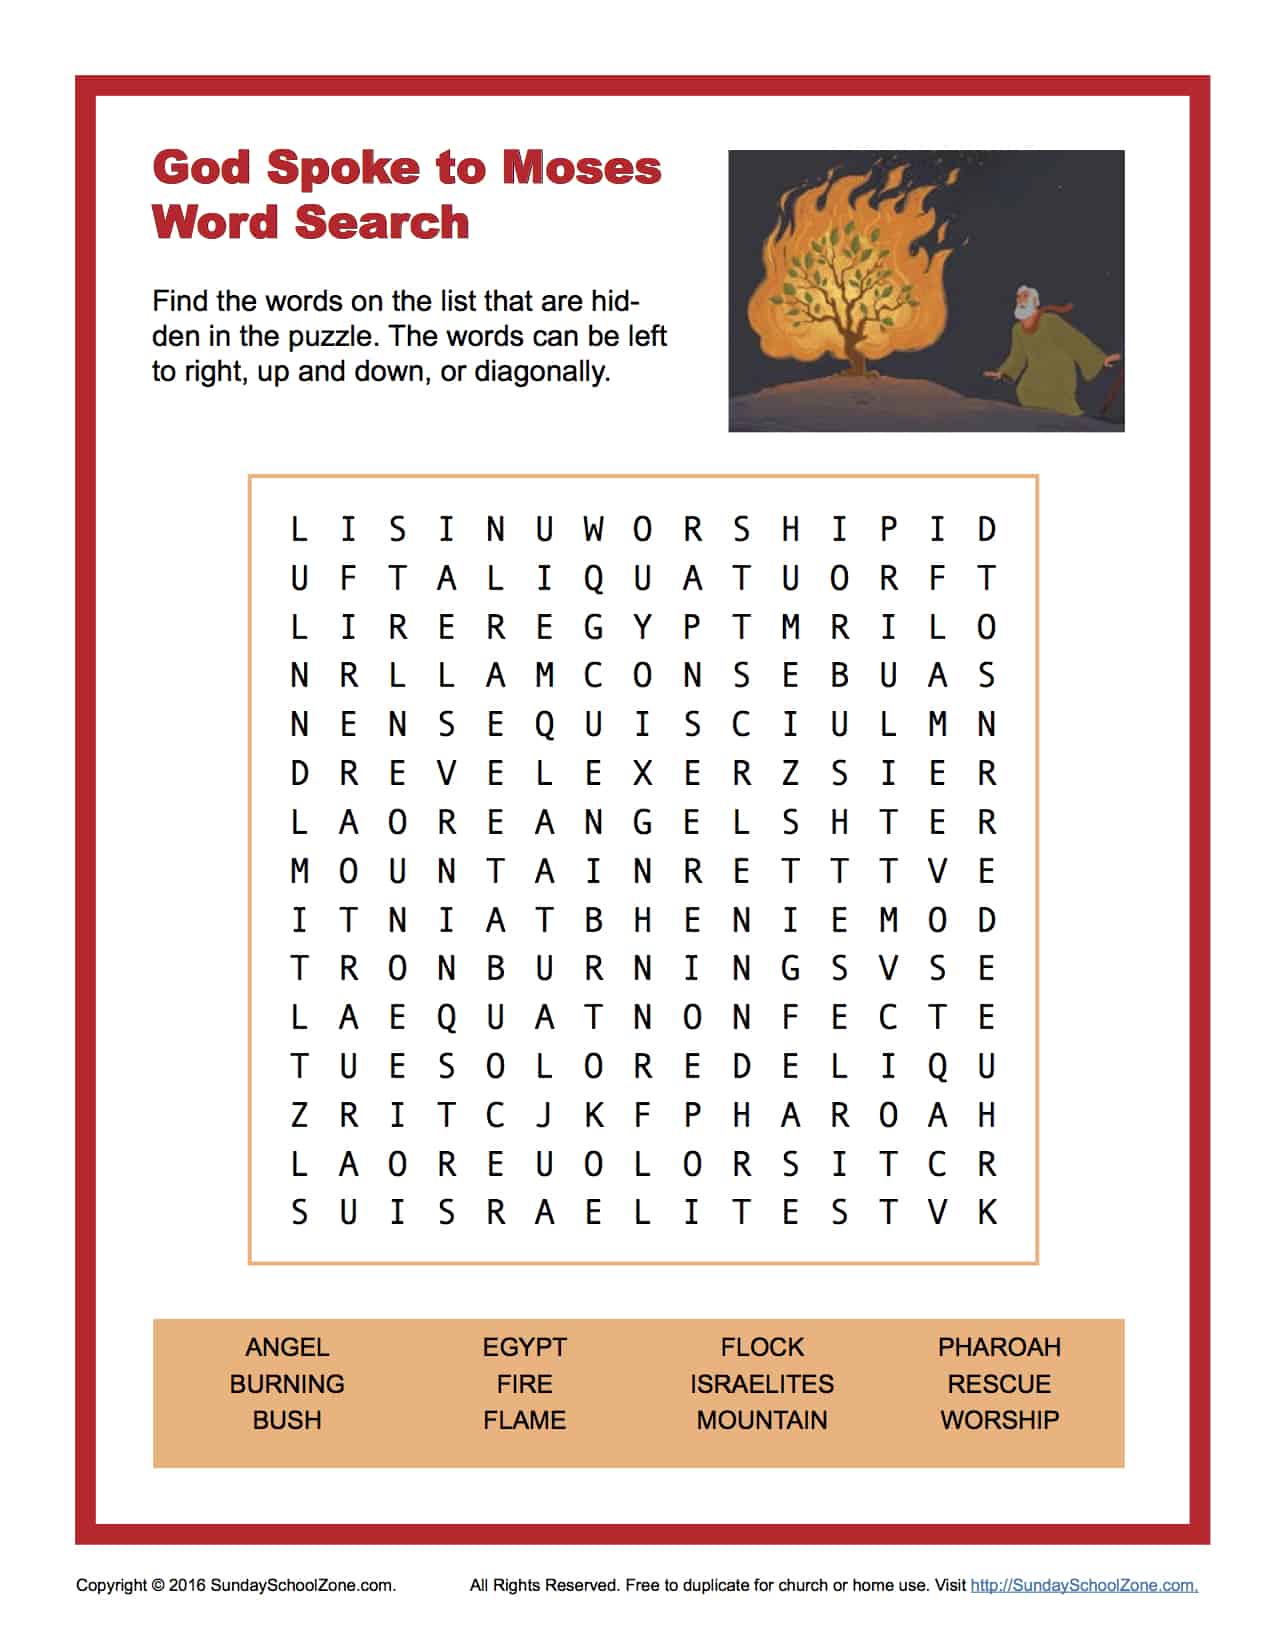 God Spoke to Moses Word Search - Children's Bible Activities | Sunday School